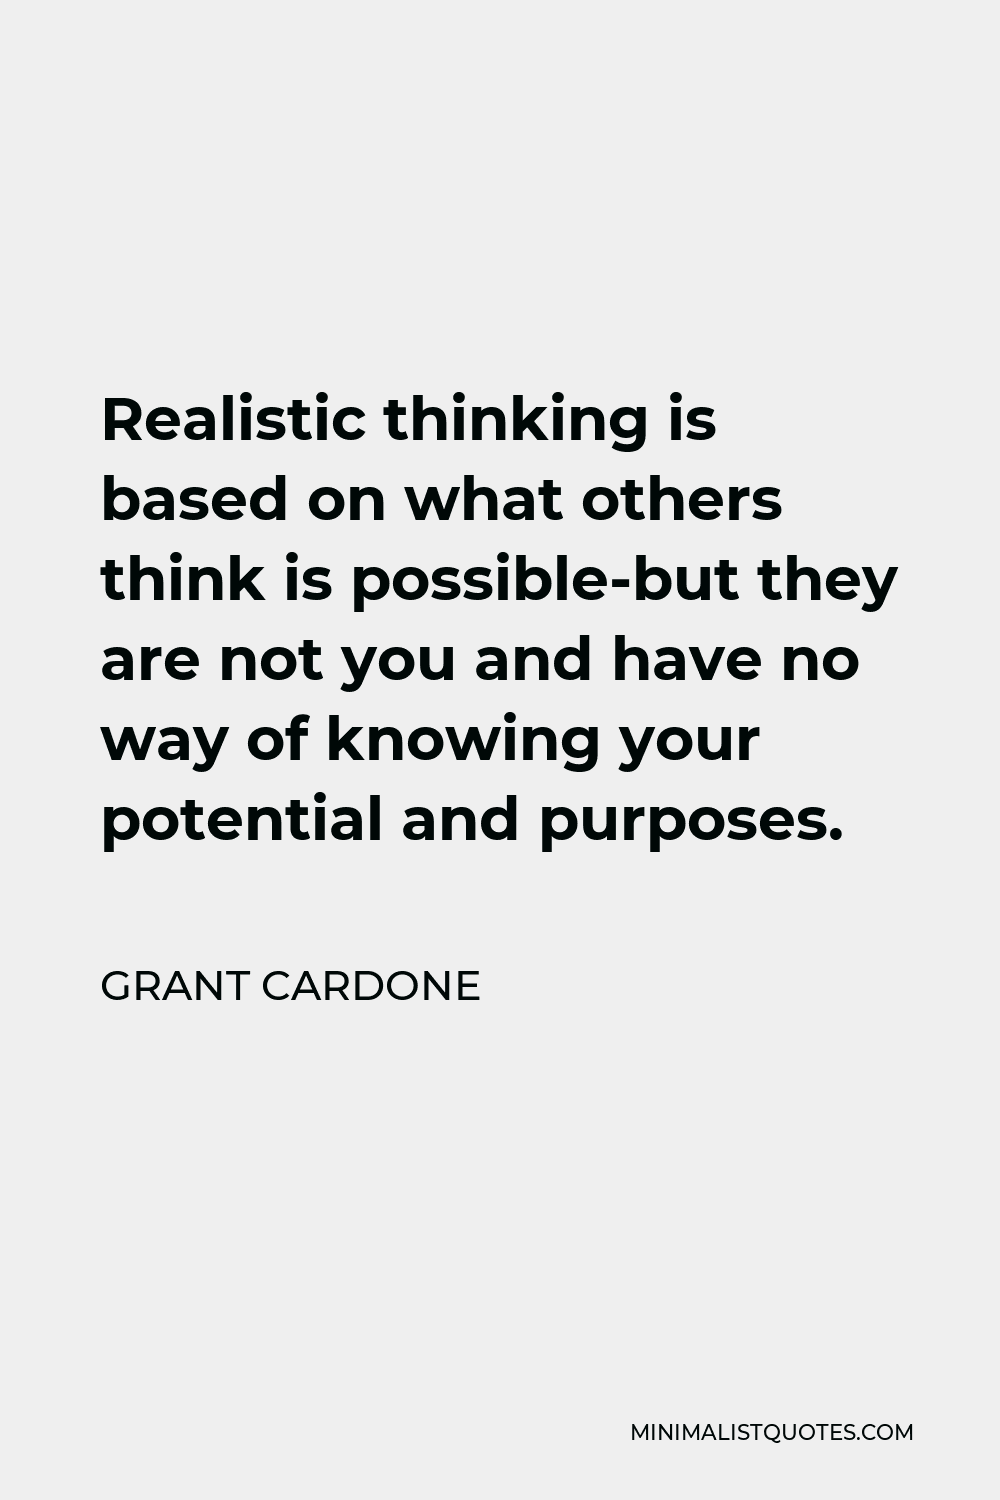 Grant Cardone Quote - Realistic thinking is based on what others think is possible-but they are not you and have no way of knowing your potential and purposes.